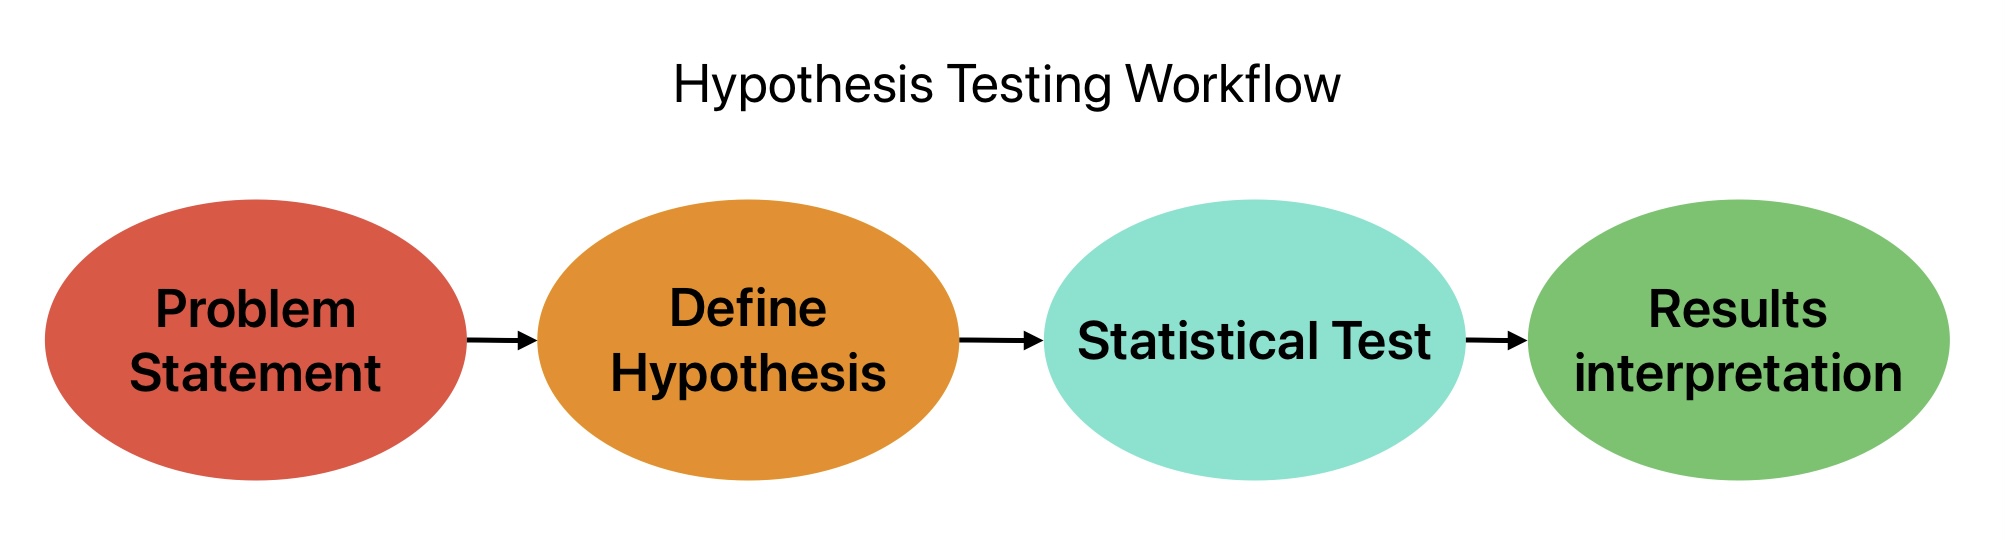 This image shows the workflow for hypothesis testing